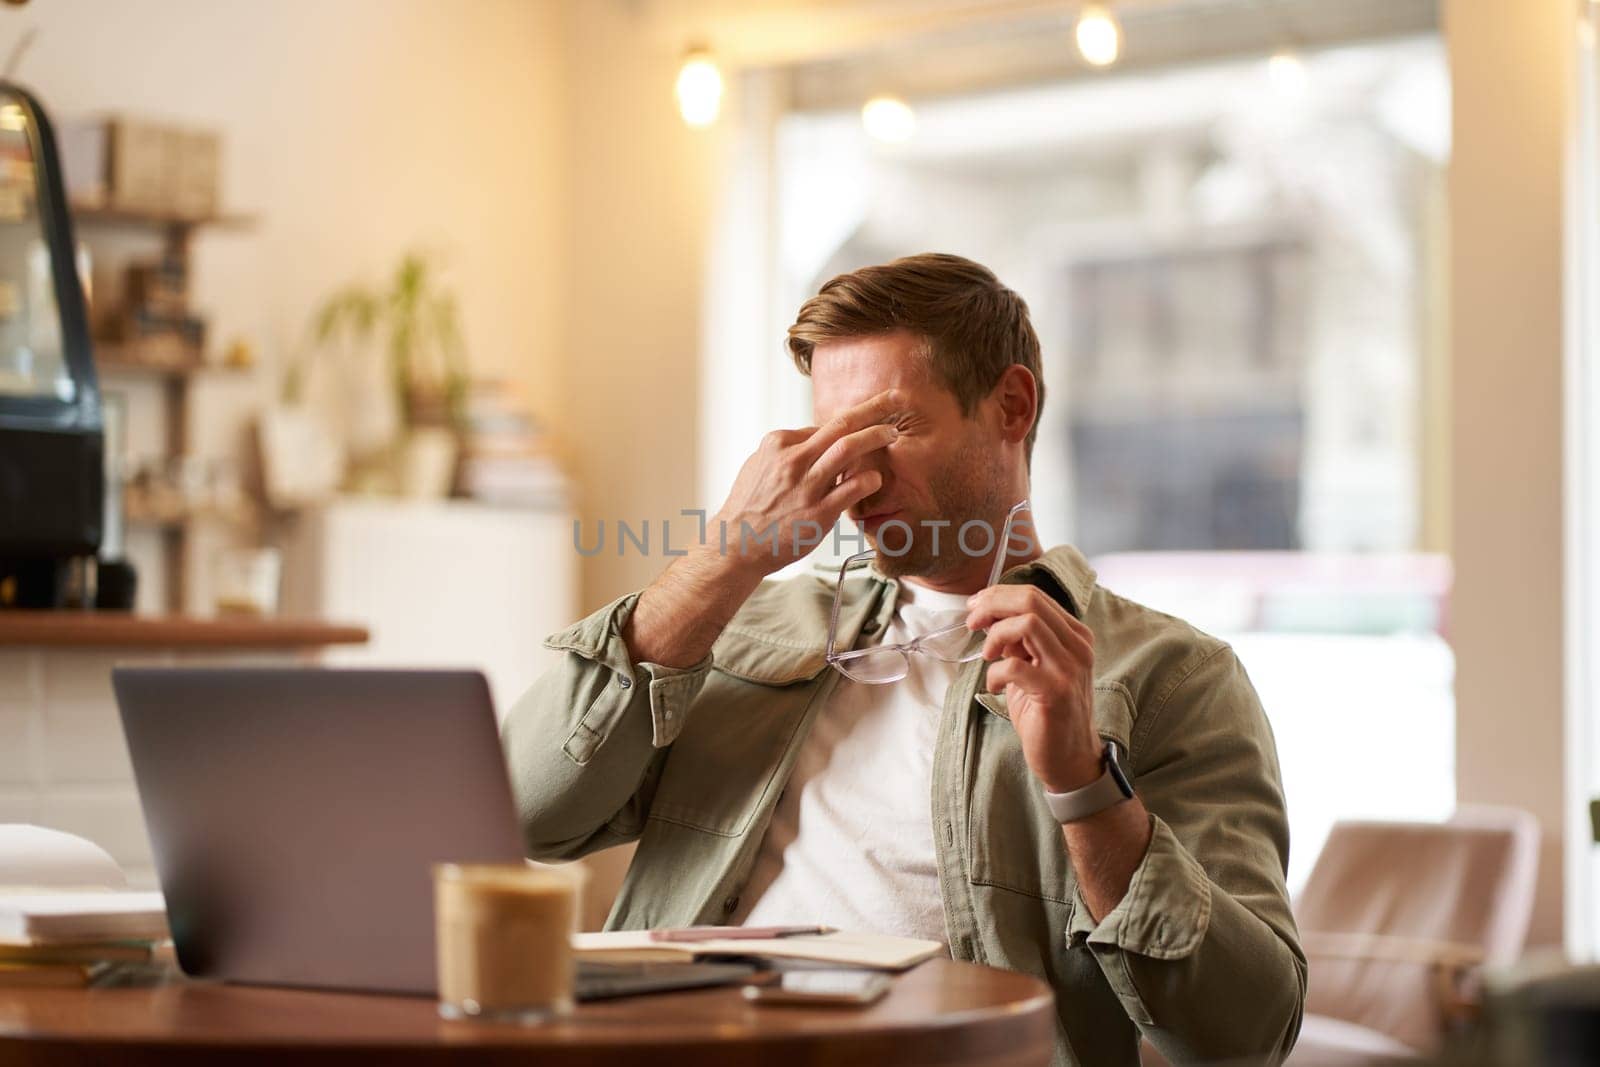 Portrait of tired man rubbing his eyes after looking at laptop screen and working on computer, sitting in cafe, having a break, taking off his glasses.